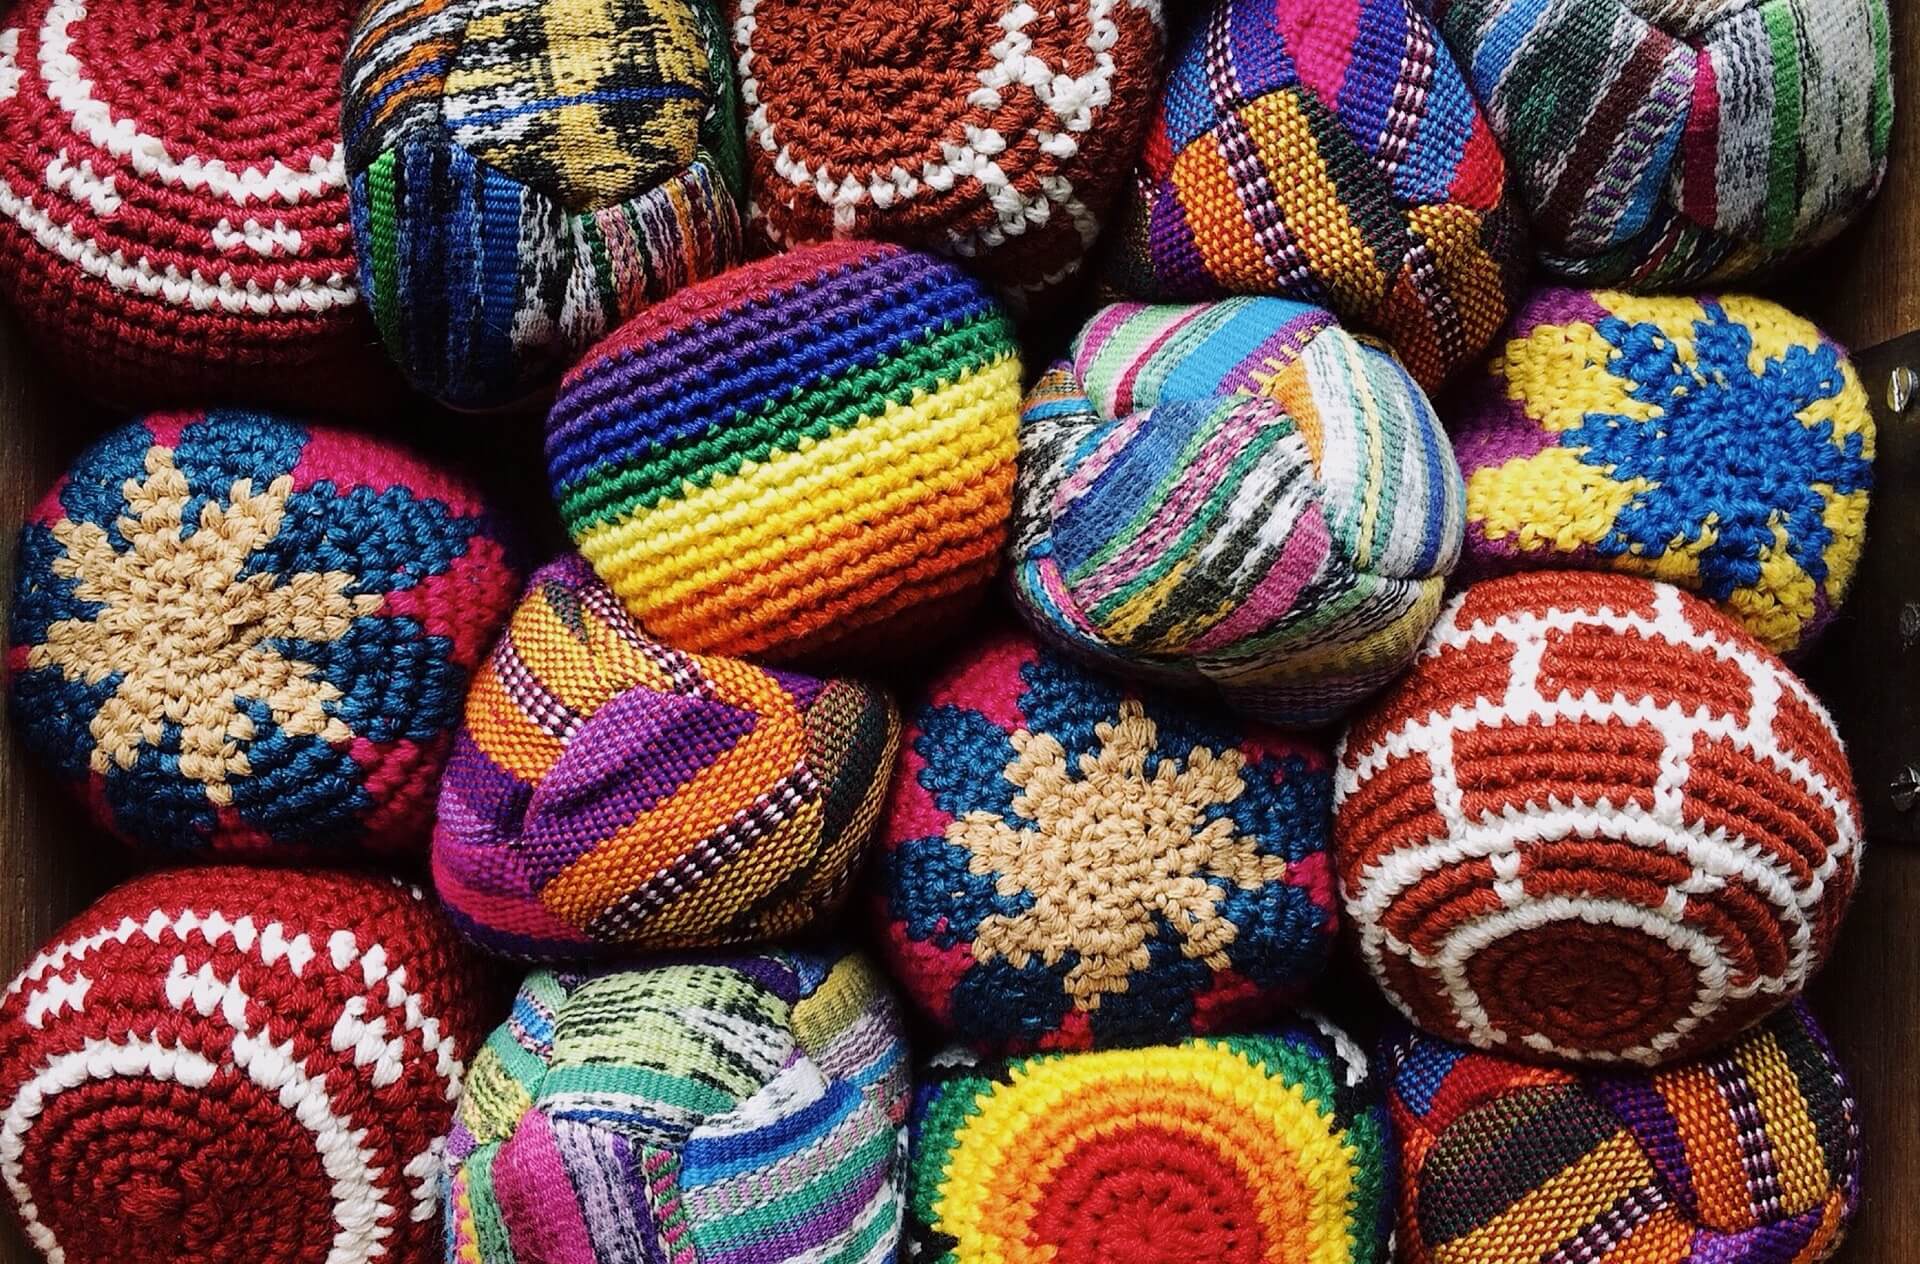 Colorful knitted holiday hackey sacks